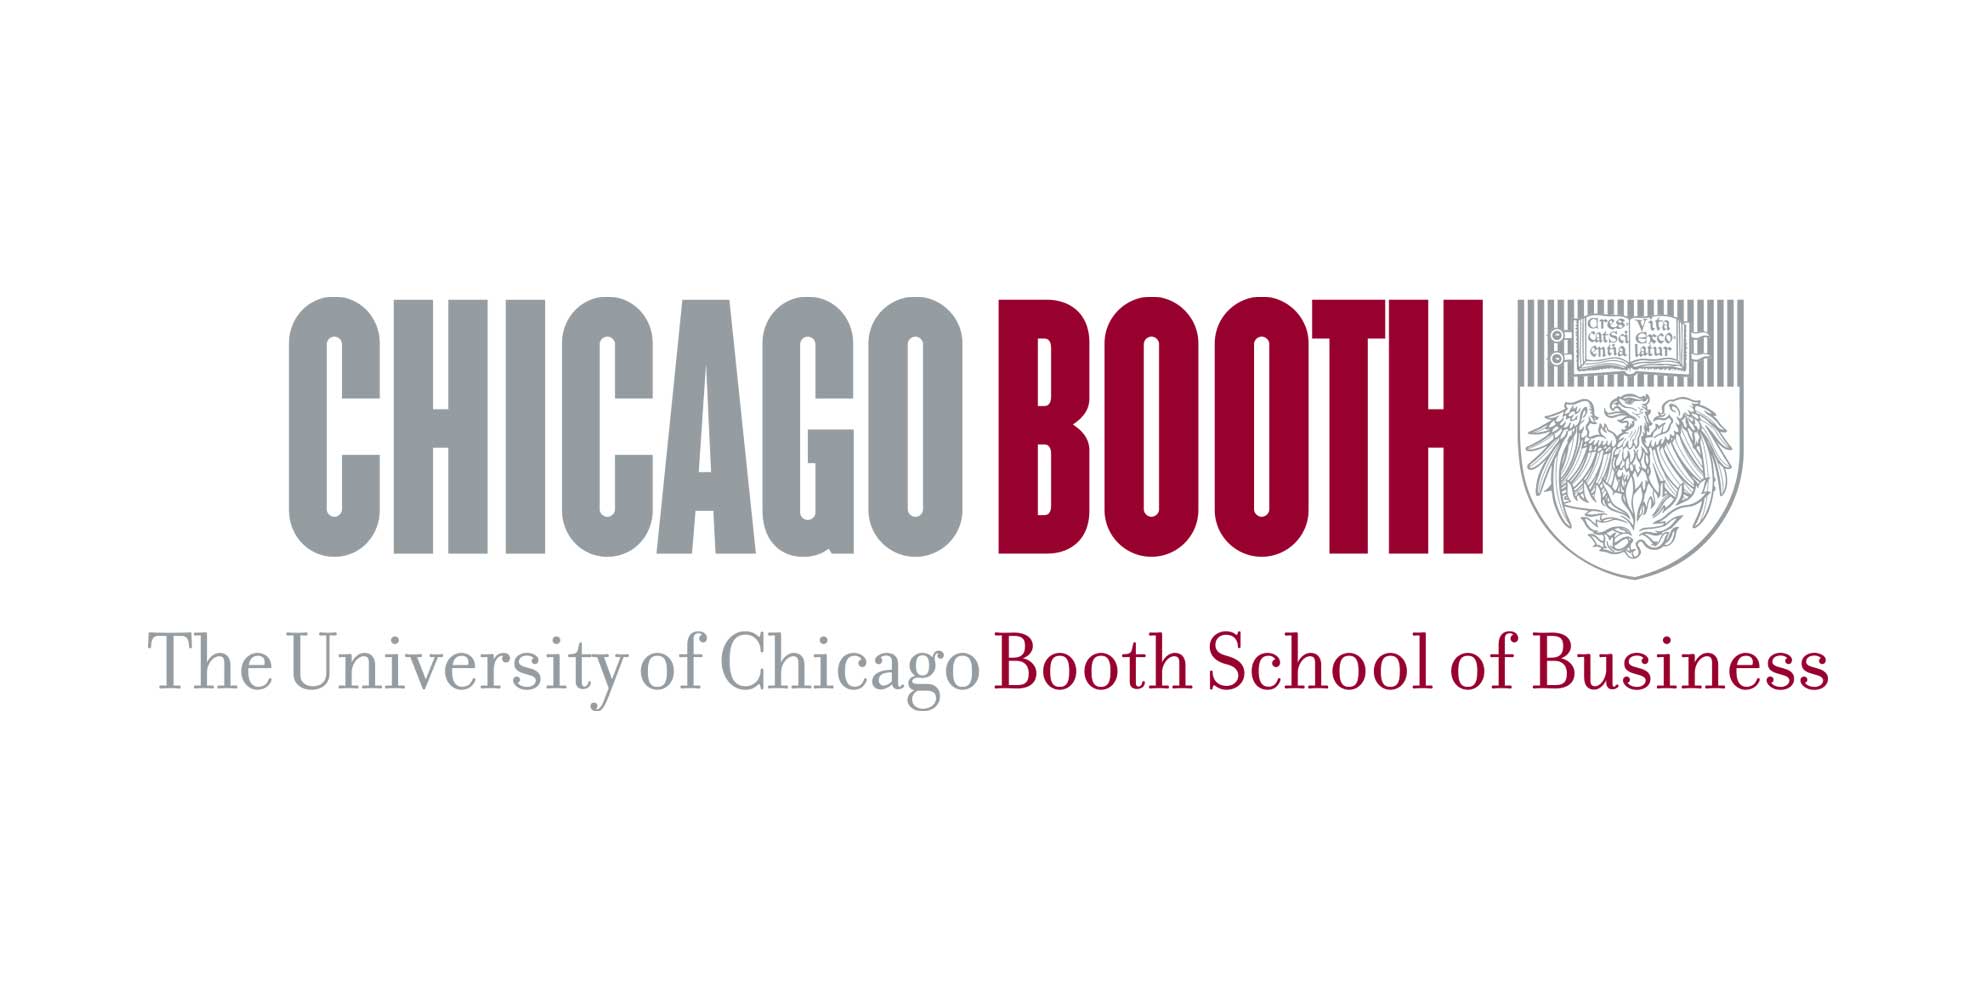 University of Chicago Logo - University of Chicago Booth School of Business - Crosby Associates ...